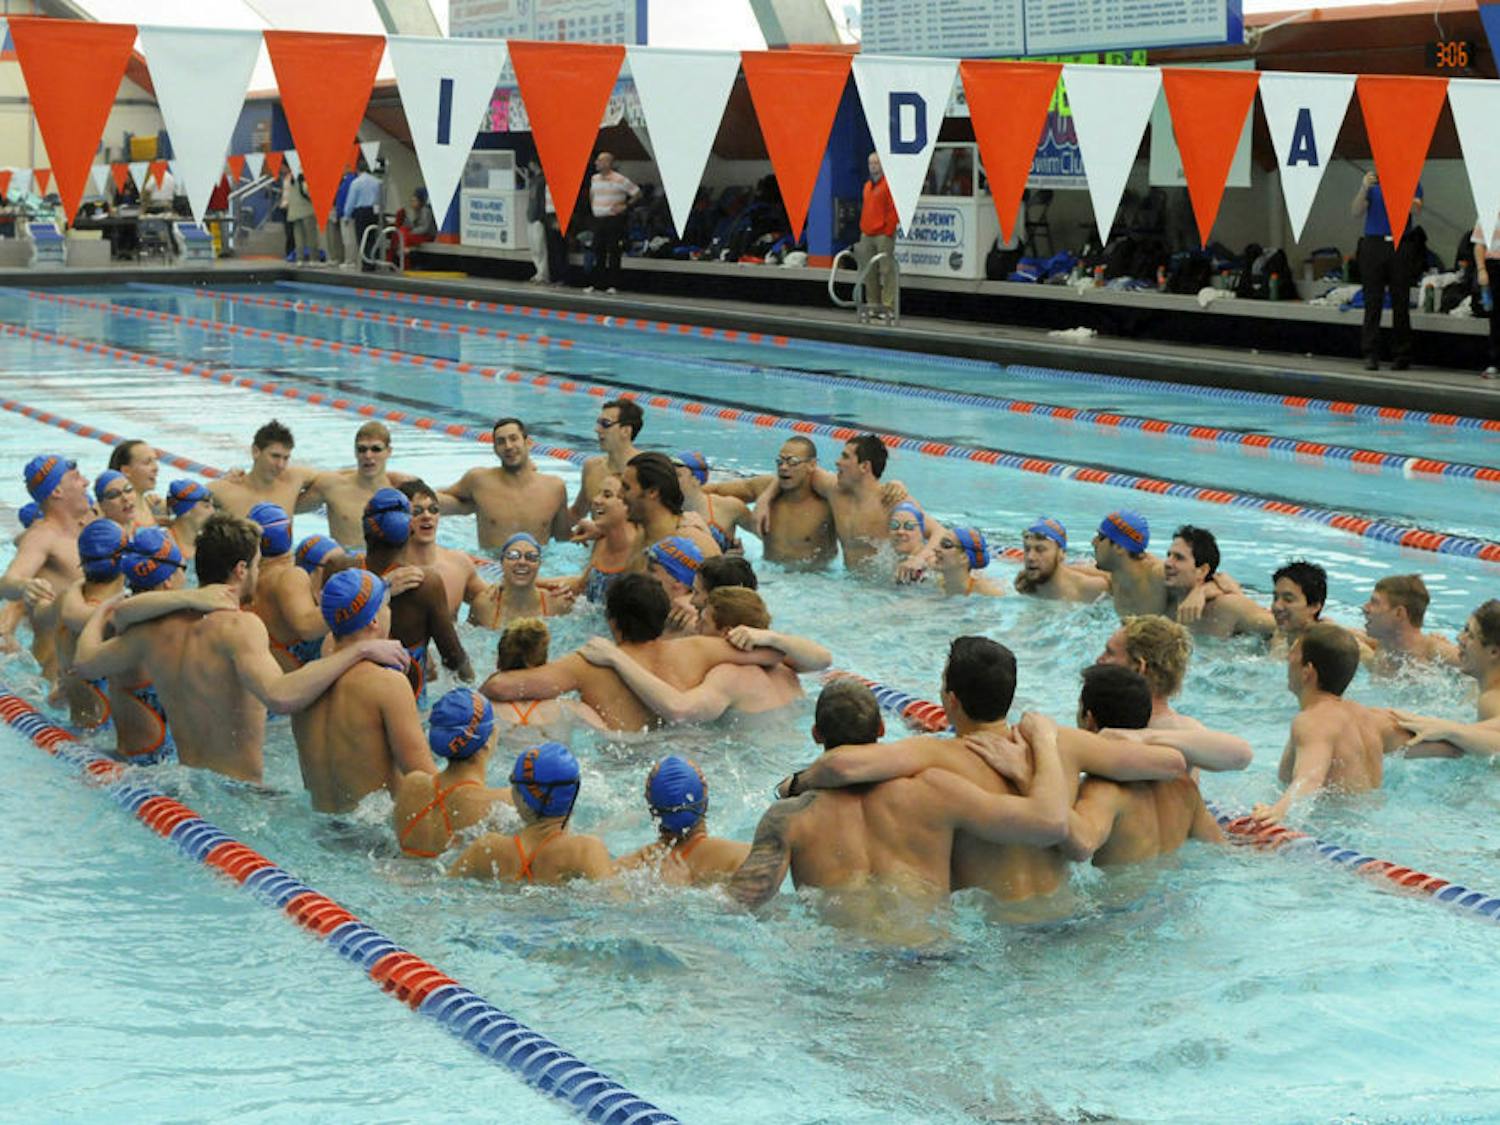 The UF swimming teams will compete in Athens, Georgia, at the SEC Championships this week.&nbsp;The men’s team heads into the championships ranked No. 6 in the nation.